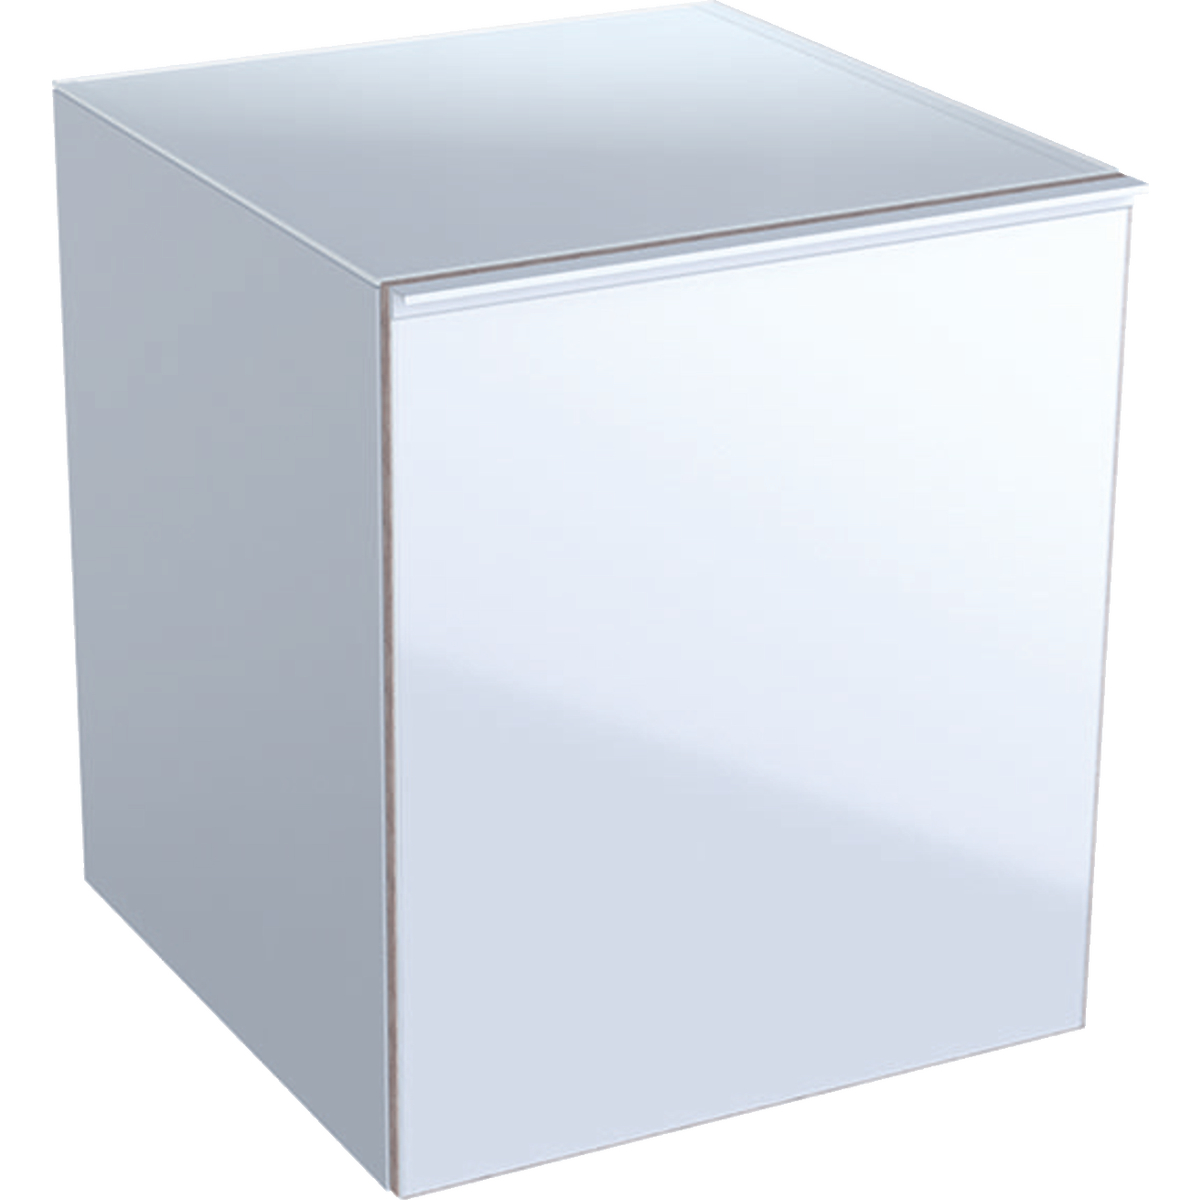 Geberit 500618012 Acanto Low Side Unit with Drawer - White